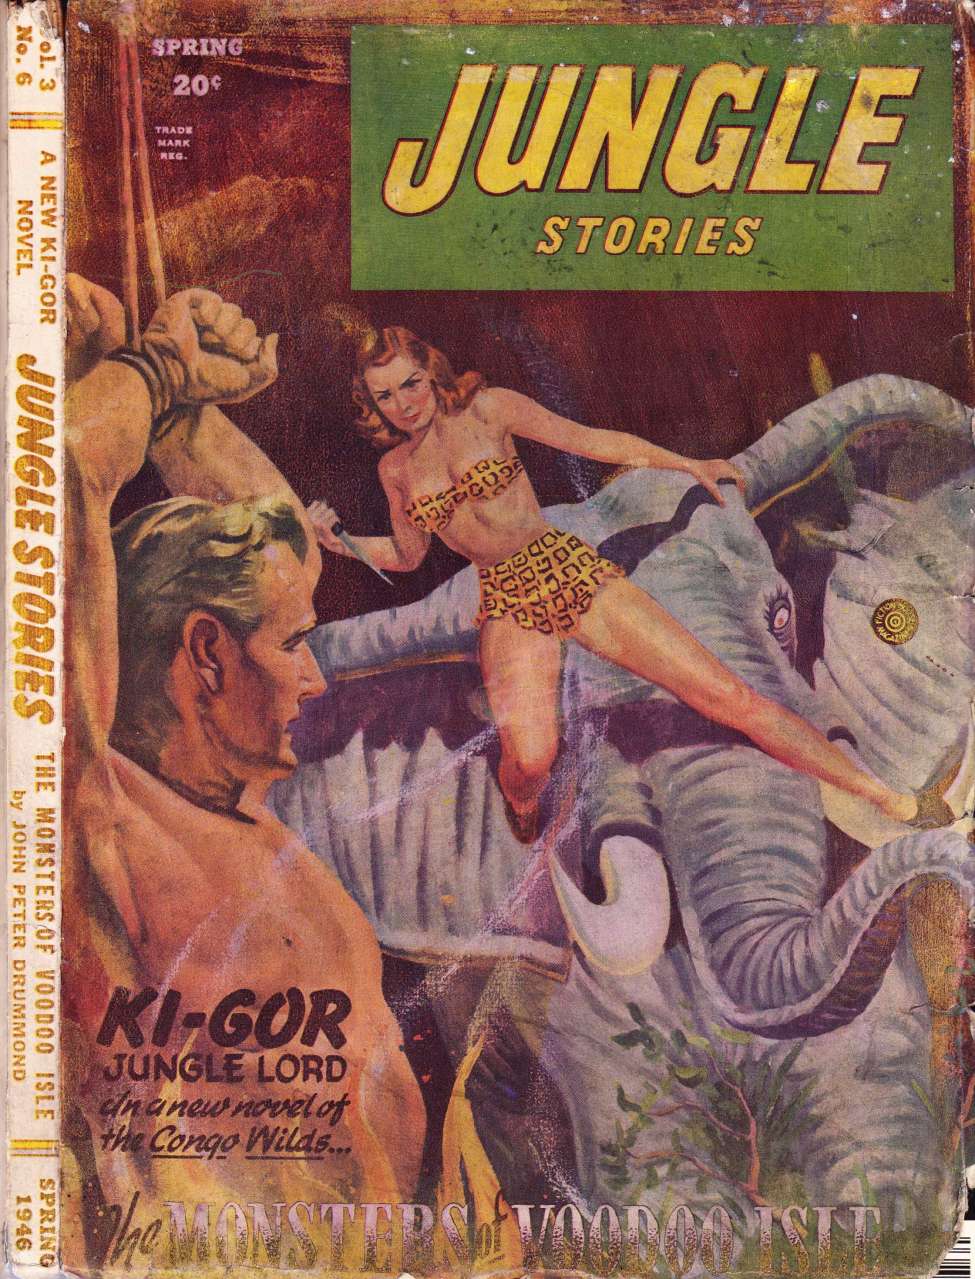 Comic Book Cover For Jungle Stories v3 6 - The Monsters of Voodoo Isle - John Peter Drummond